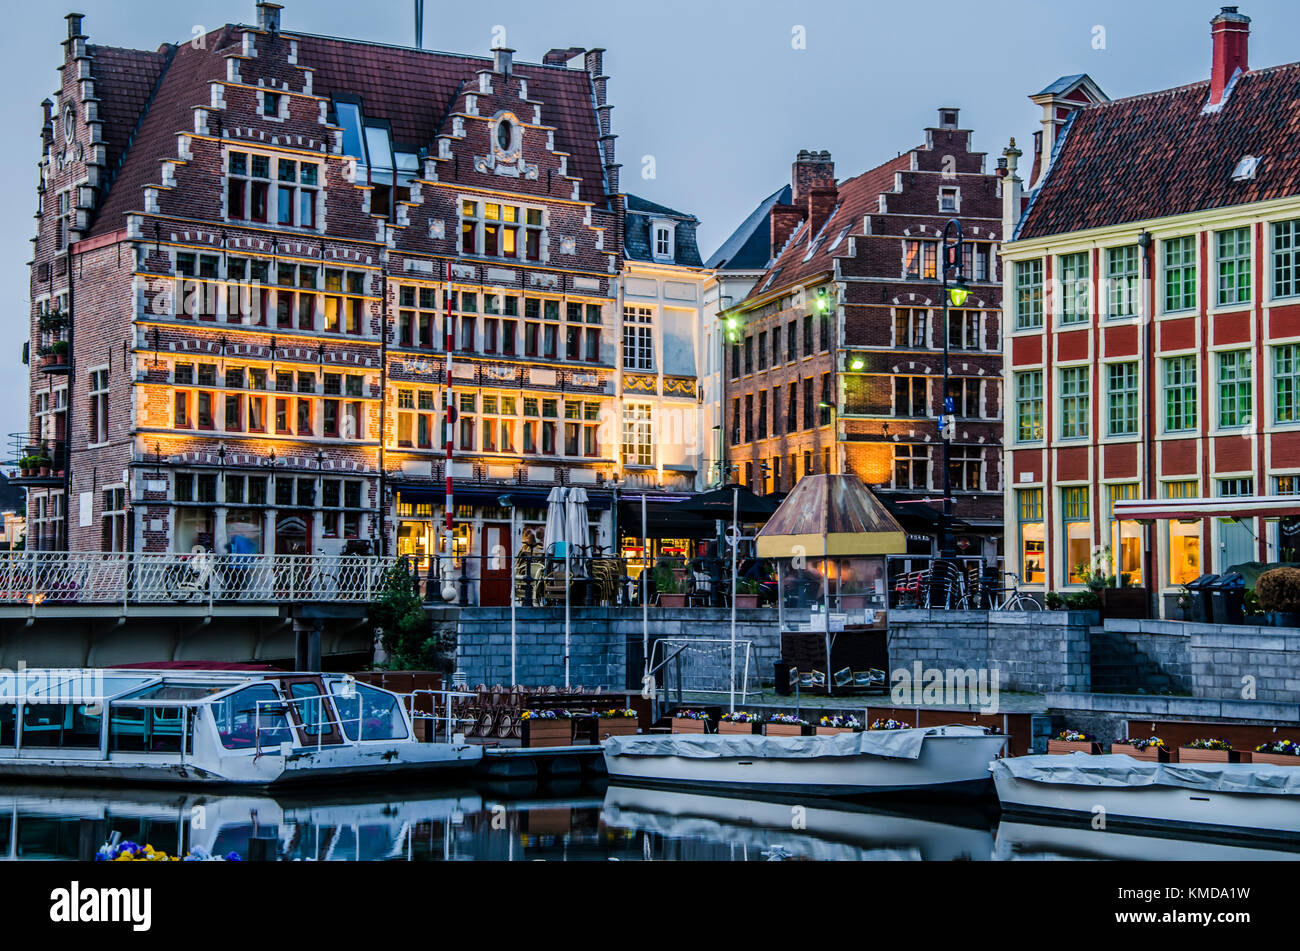 Boats pier and old buildings with its bars in ghent belgium Stock Photo